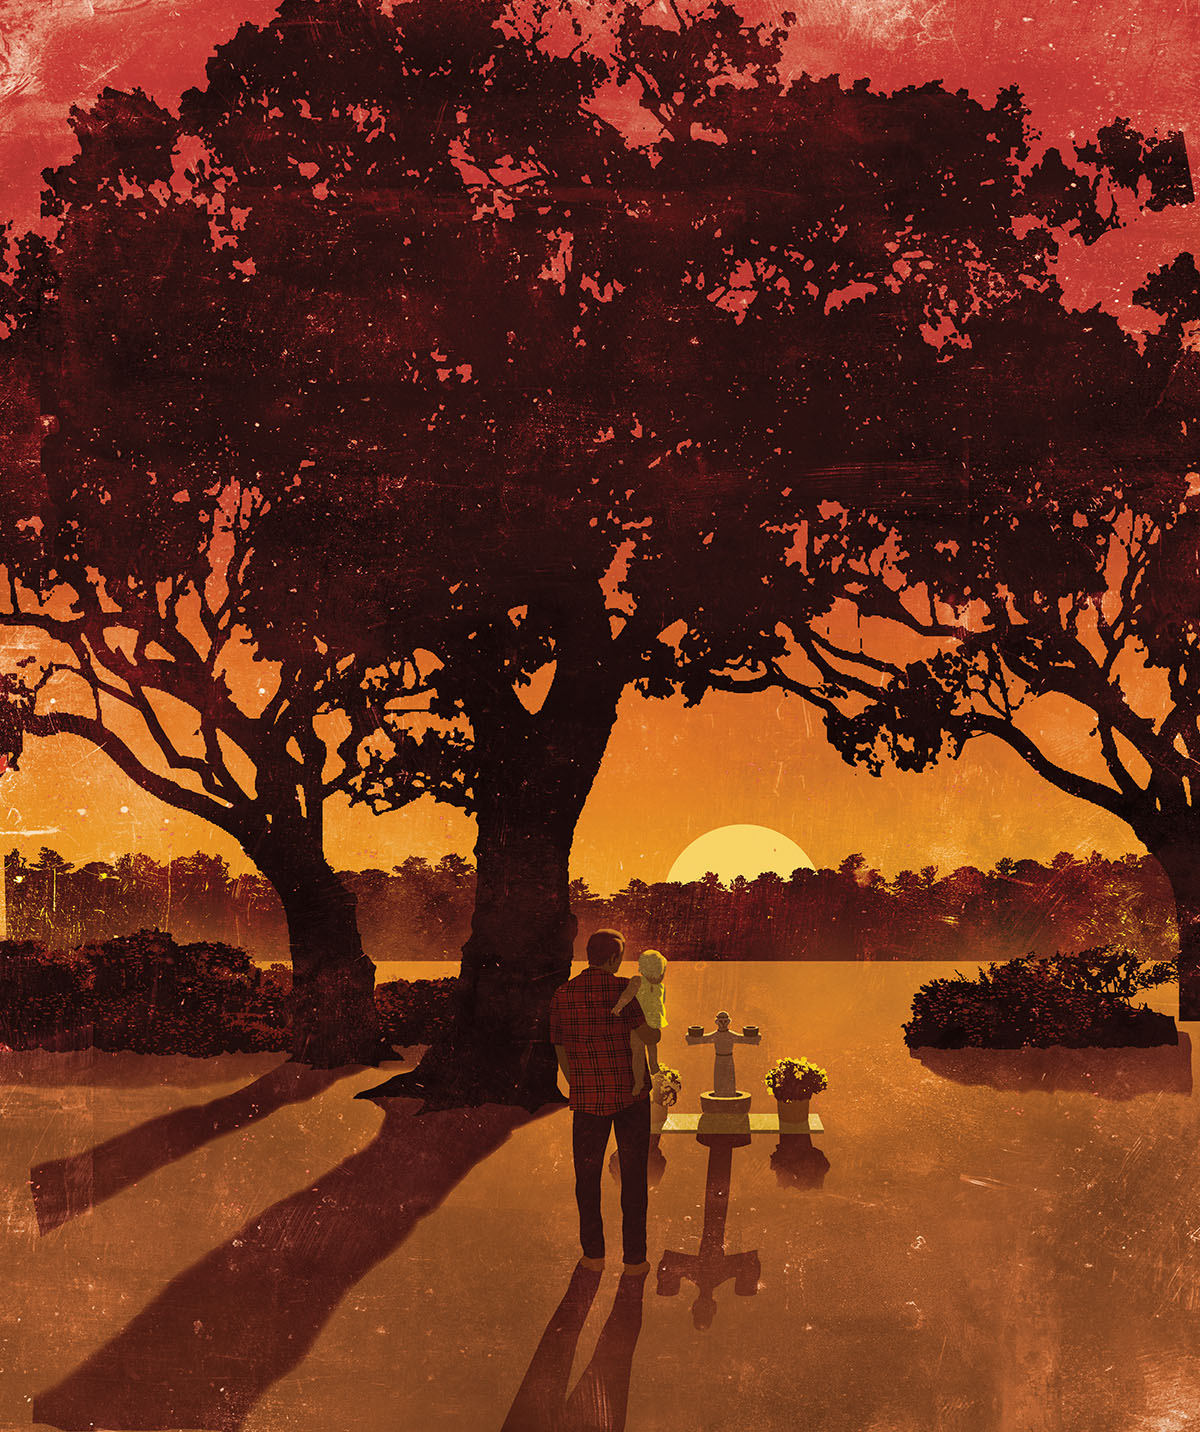 An illustration of a man holding a child in front of a gravestone, in a yellow/orange lit area under large trees